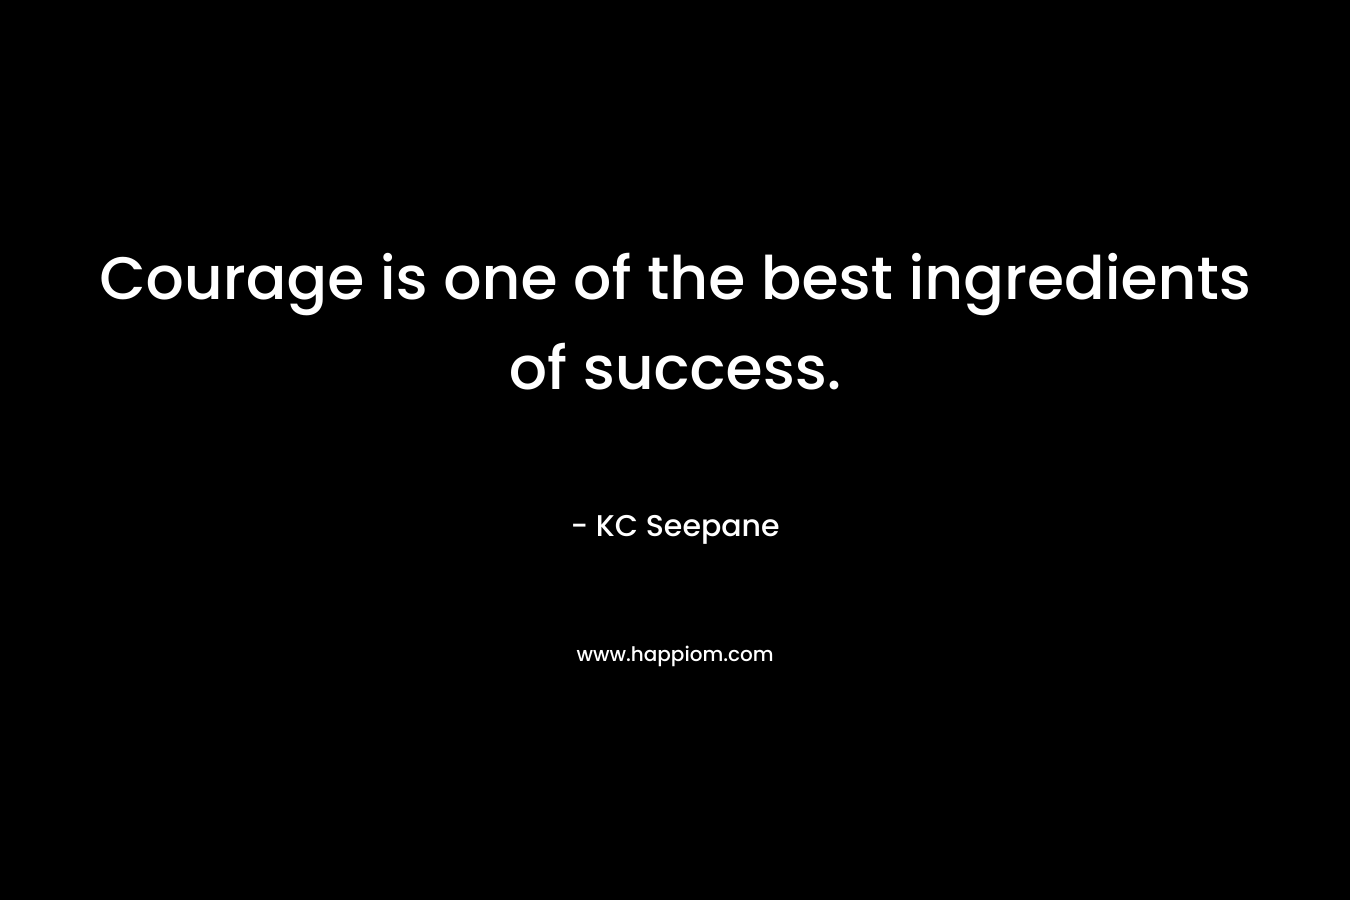 Courage is one of the best ingredients of success. – KC Seepane